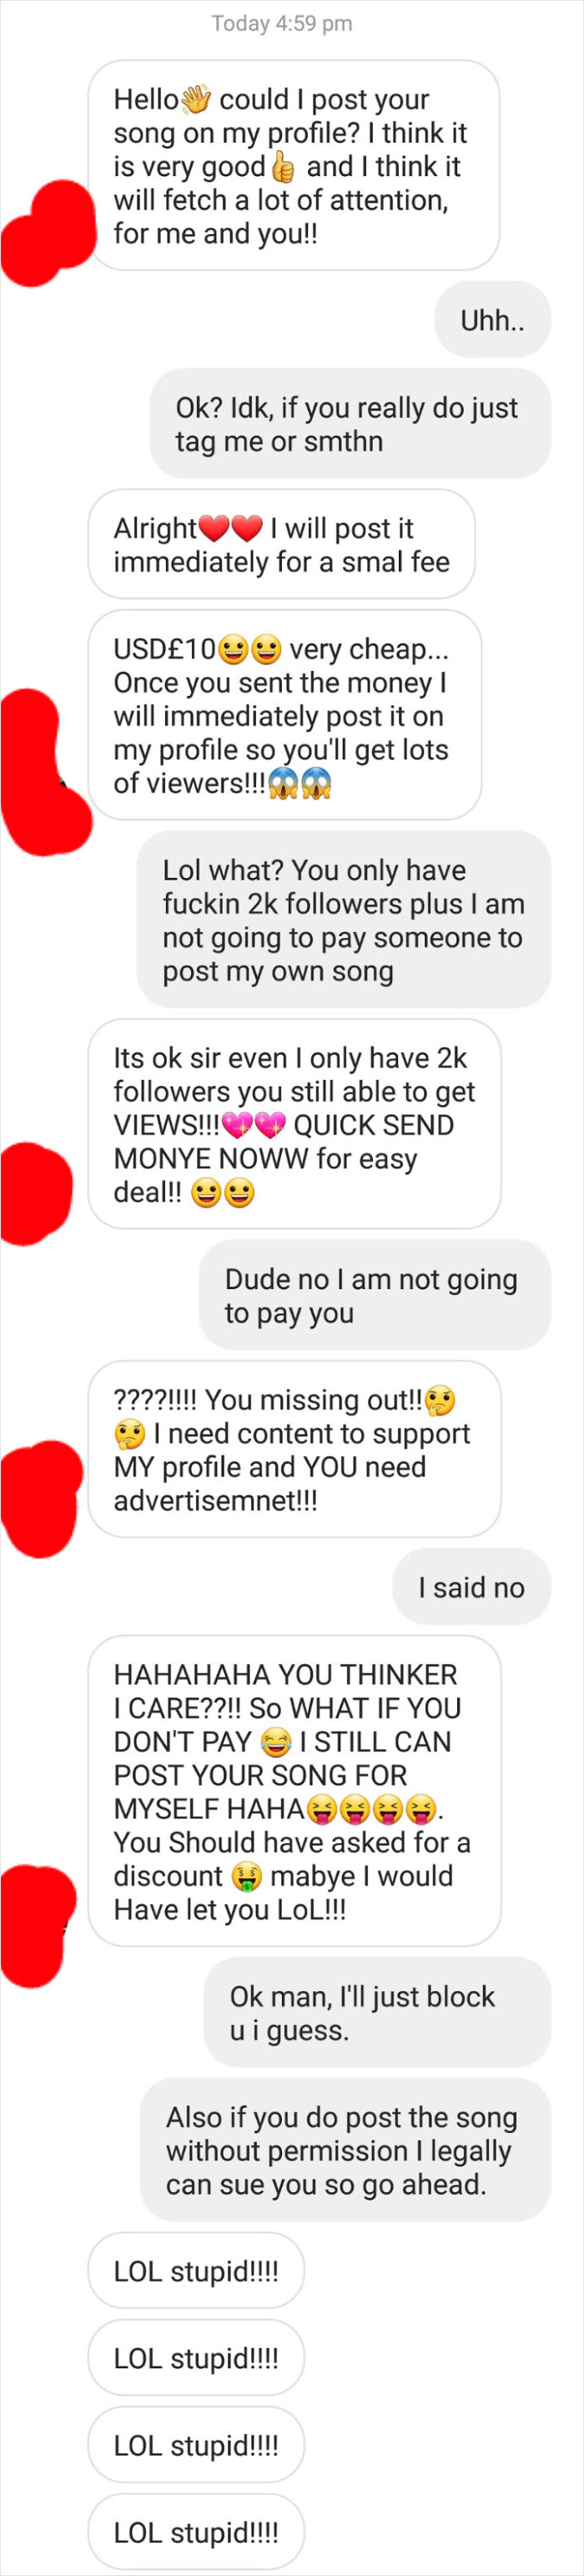 Yeah I Need Exposure, But Not This Way, Also I Think The Amount Of Emojis He Used Is Scary